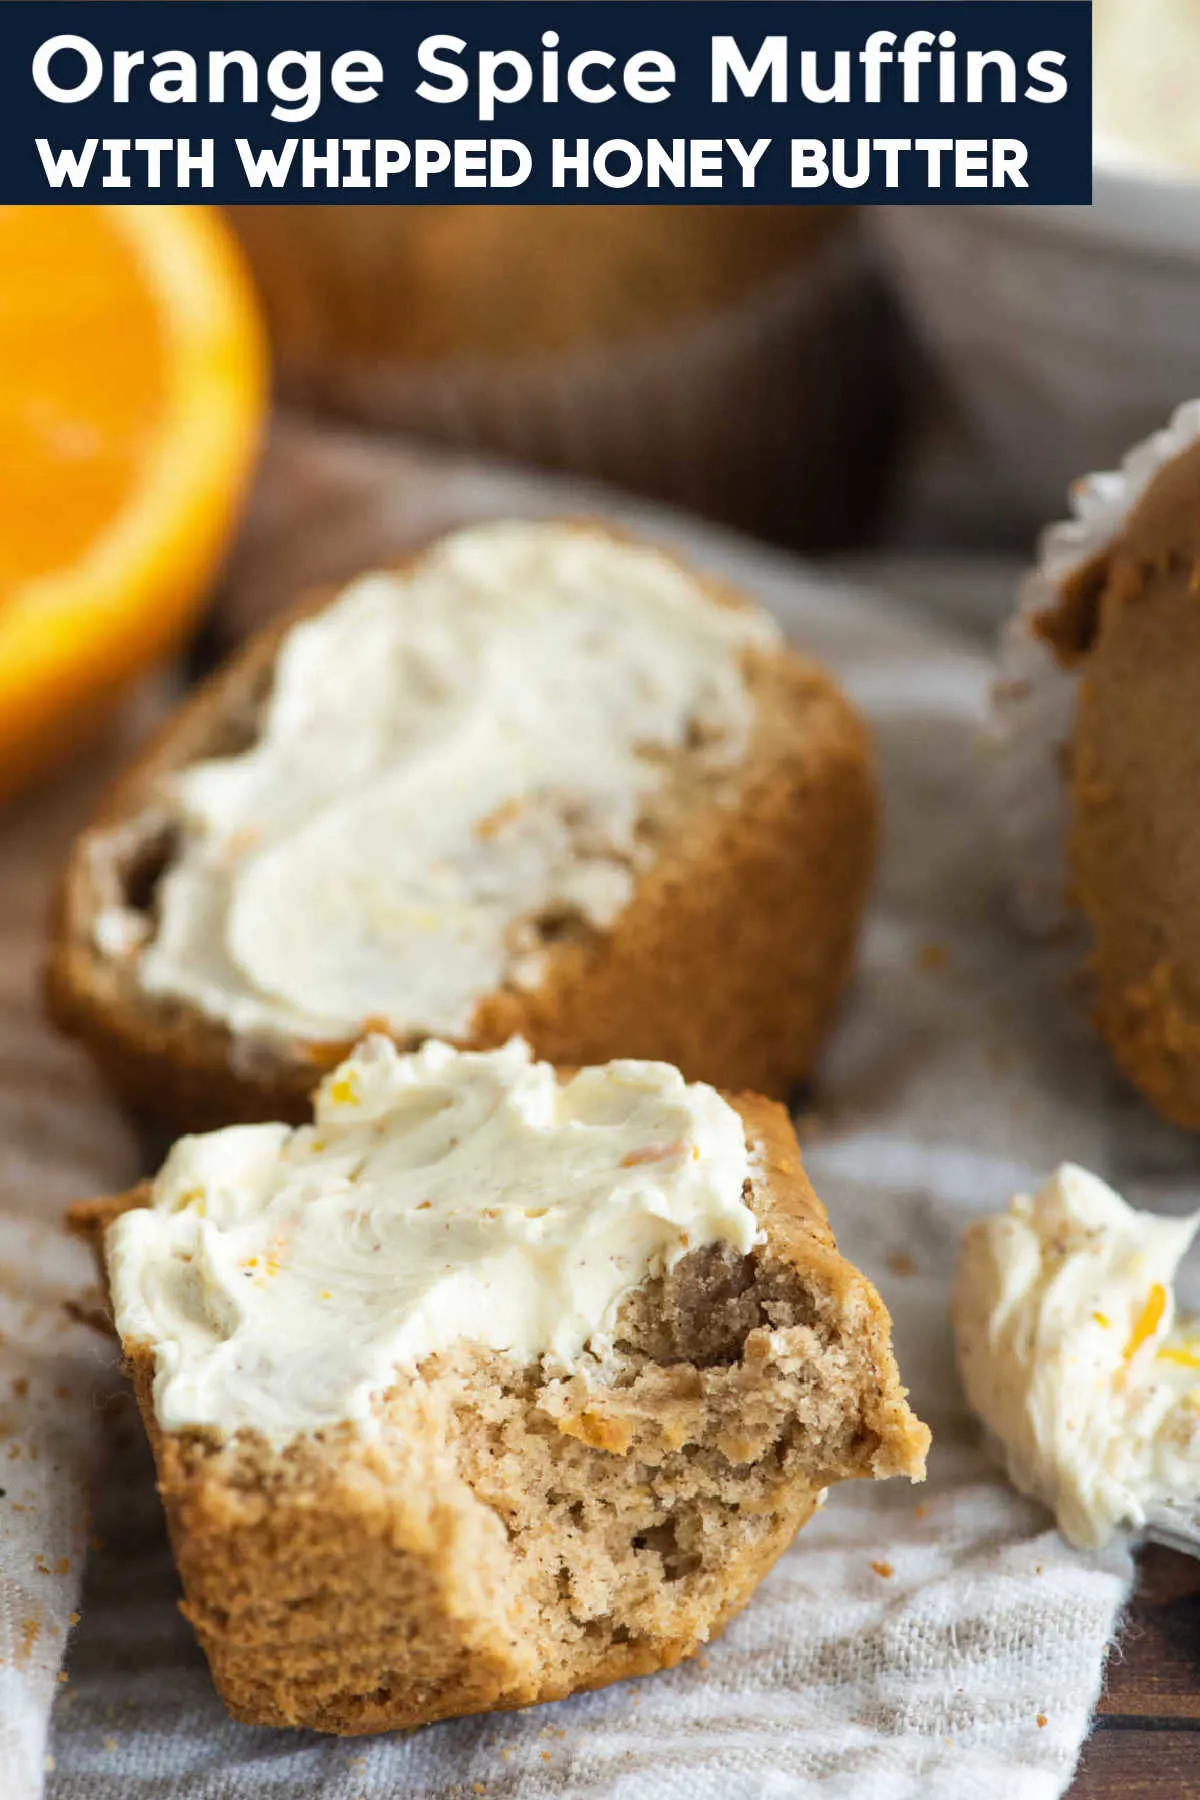 Tender orange spice muffins go perfectly with a bit of whipped honey butter. The hints of cinnamon and ginger bring big flavor to your breakfast table.